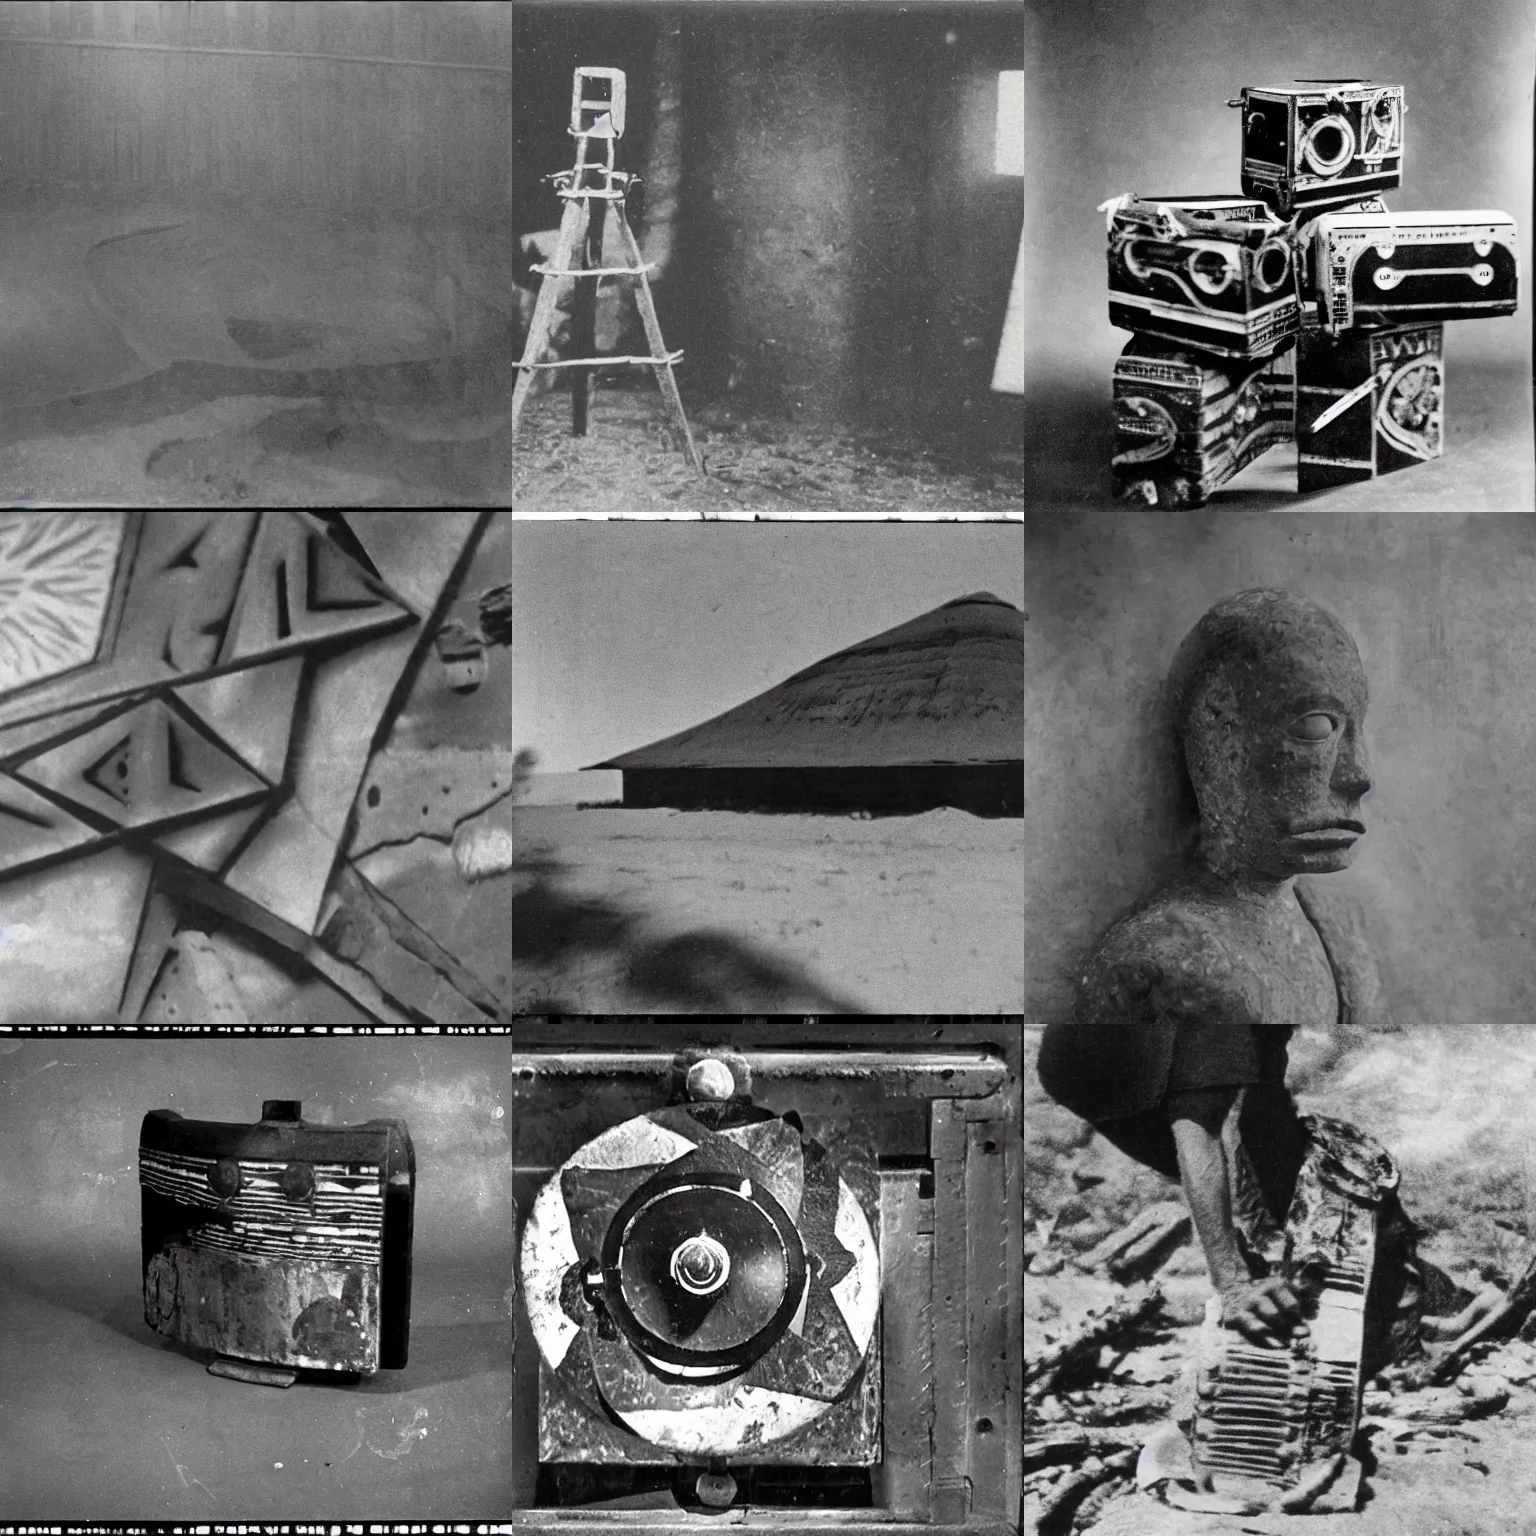 Prompt: a rizom lost film footage of tribal object / object / ( ( ( ( ( ( ( ( ( ( ( ( ( ( ( ( ( abstractmodernist ) ) ) ) ) ) ) ) ) ) ) ) ) ) / film still / cinematic / enhanced / 1 9 0 0 s / black and white / grain